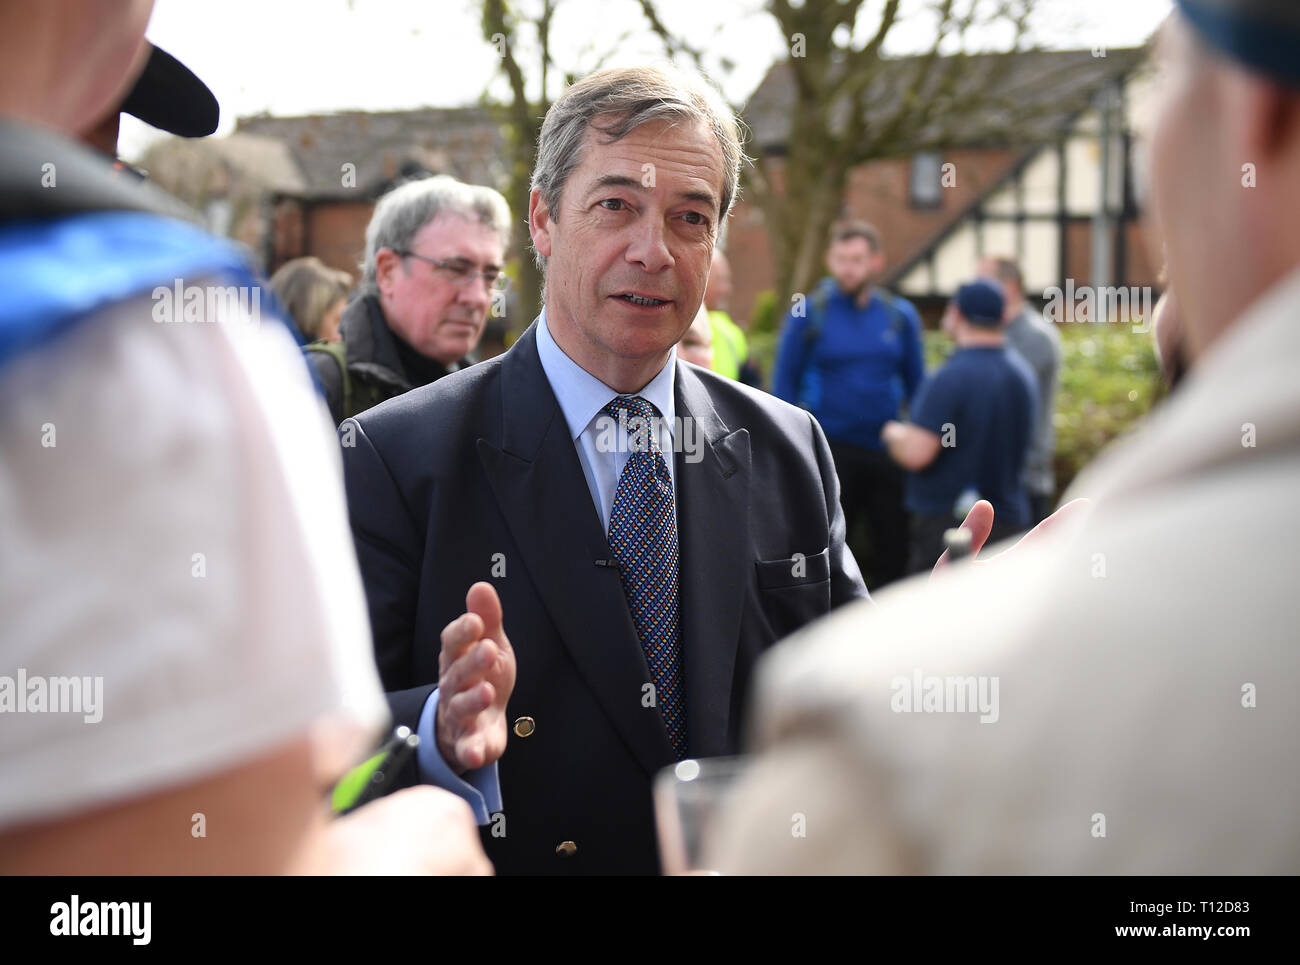 Former UKIP leader Nigel Farage during a lunch break of the March to Leave protest in Nuthall, Nottingham on their way to London over a 14-day period, arriving in the capital on March 29, where a mass rally will take place on Parliament Square. Stock Photo